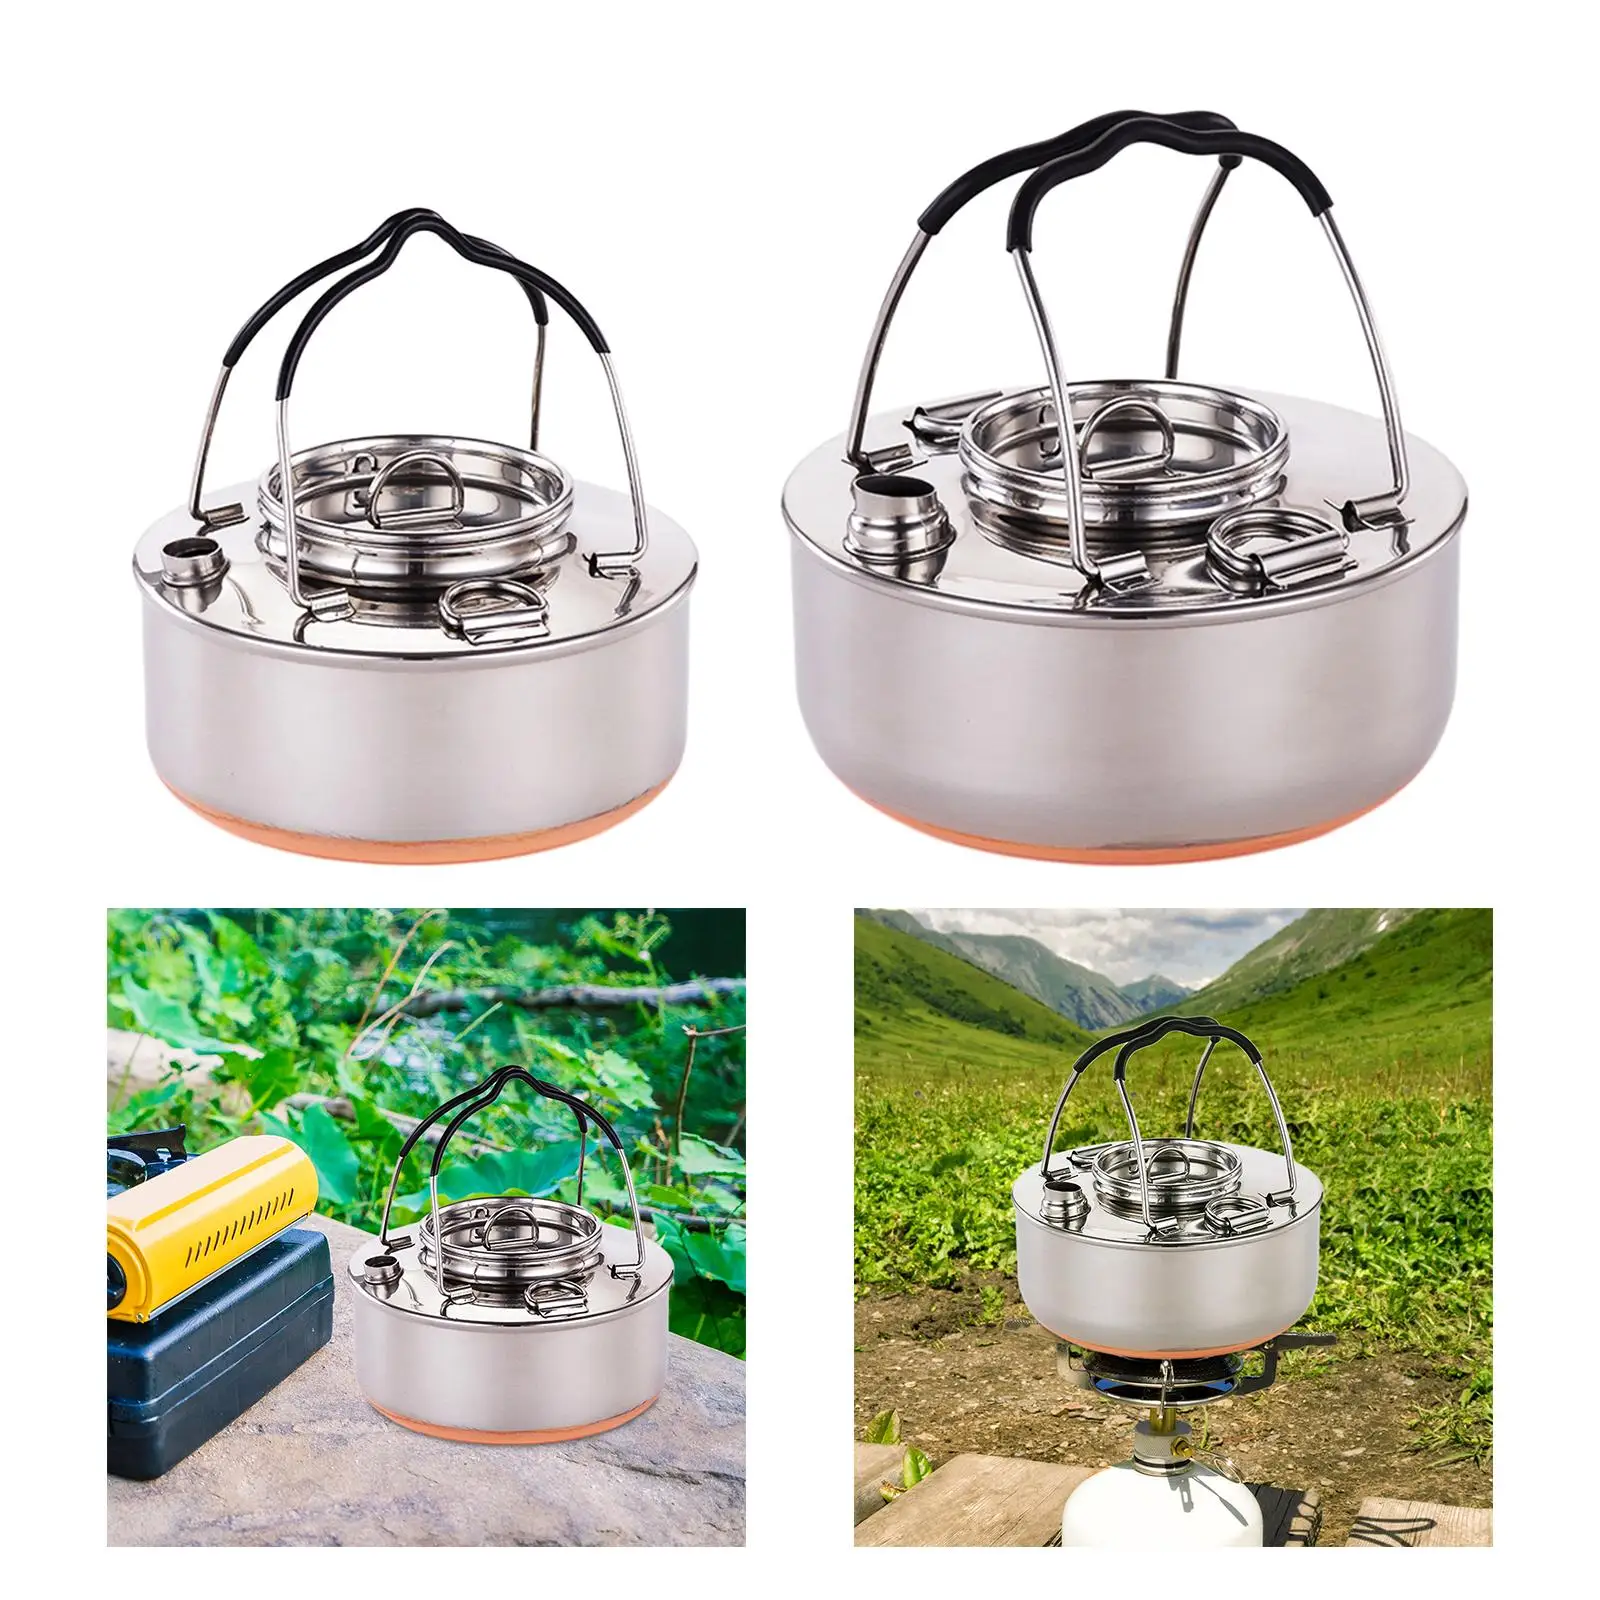 Camping Kettle Water Kettle Lightweight Anti-scald Folded Handle Camping Tea